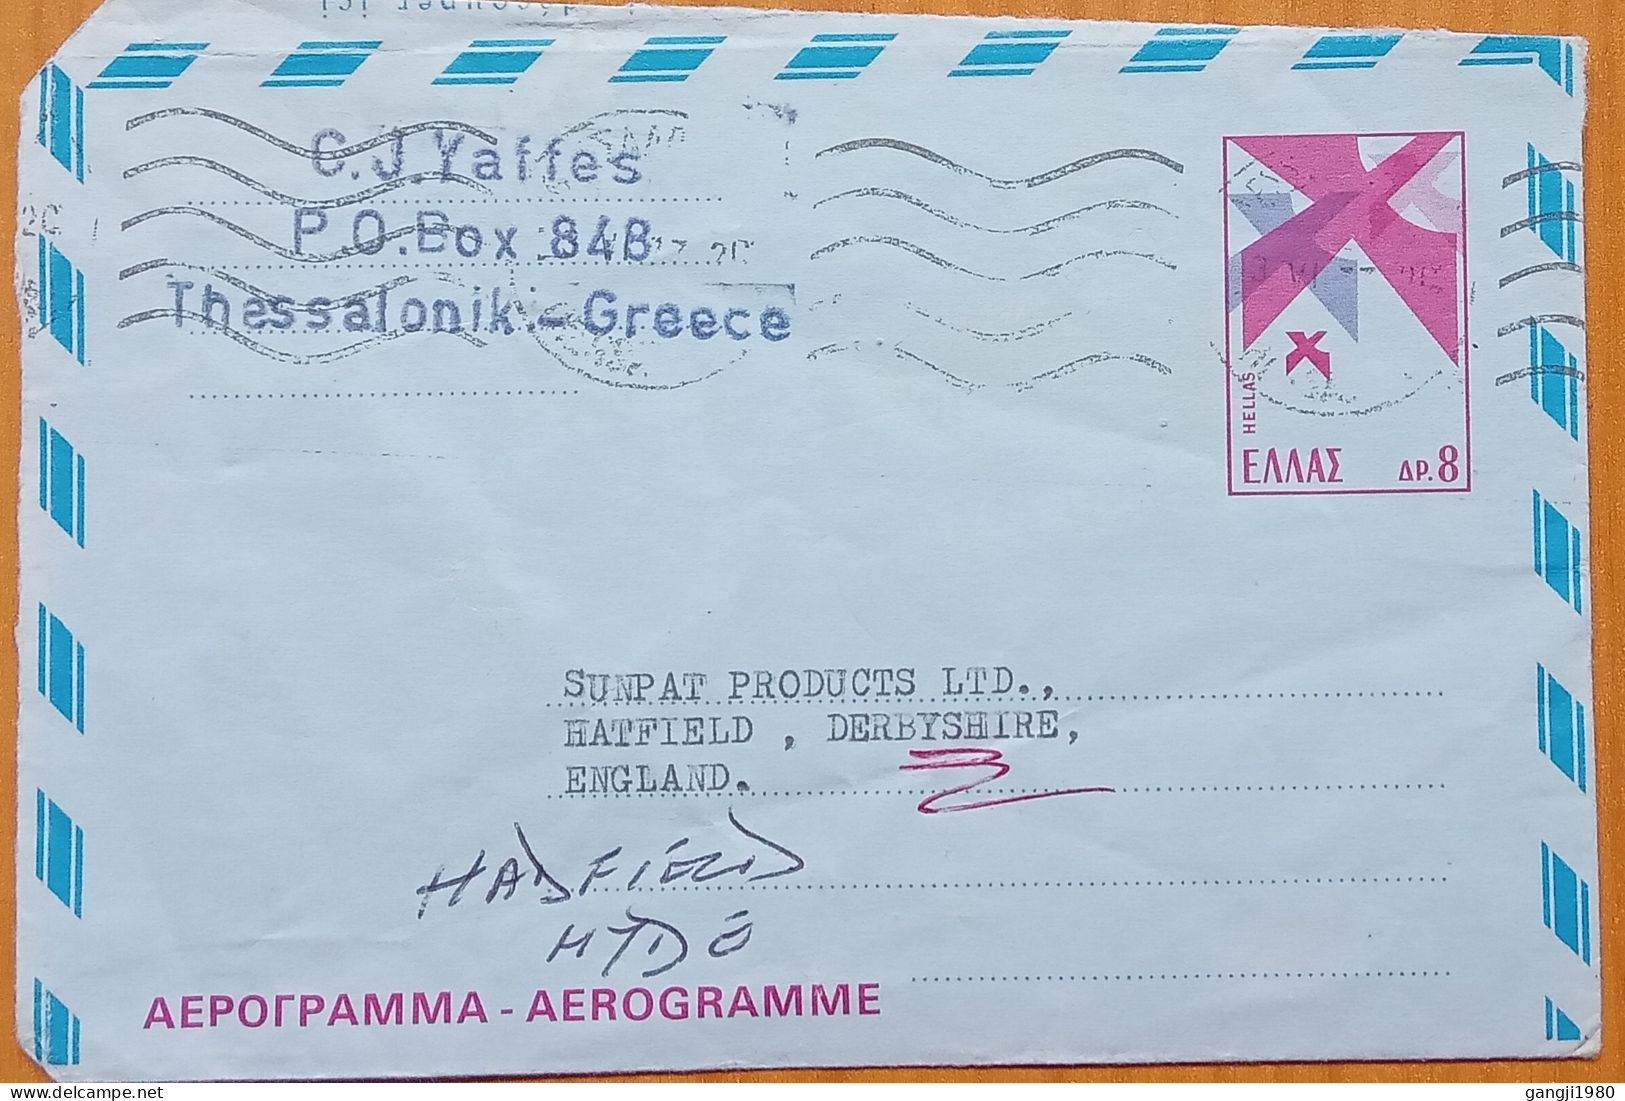 GREECE 1977, STATIONERY, AEROGRAMME, VIEW THESSALONIK CITY, 8 DRACHMA VALUE, BIRD SYMBOL, USED TO ENGLAND, - Covers & Documents